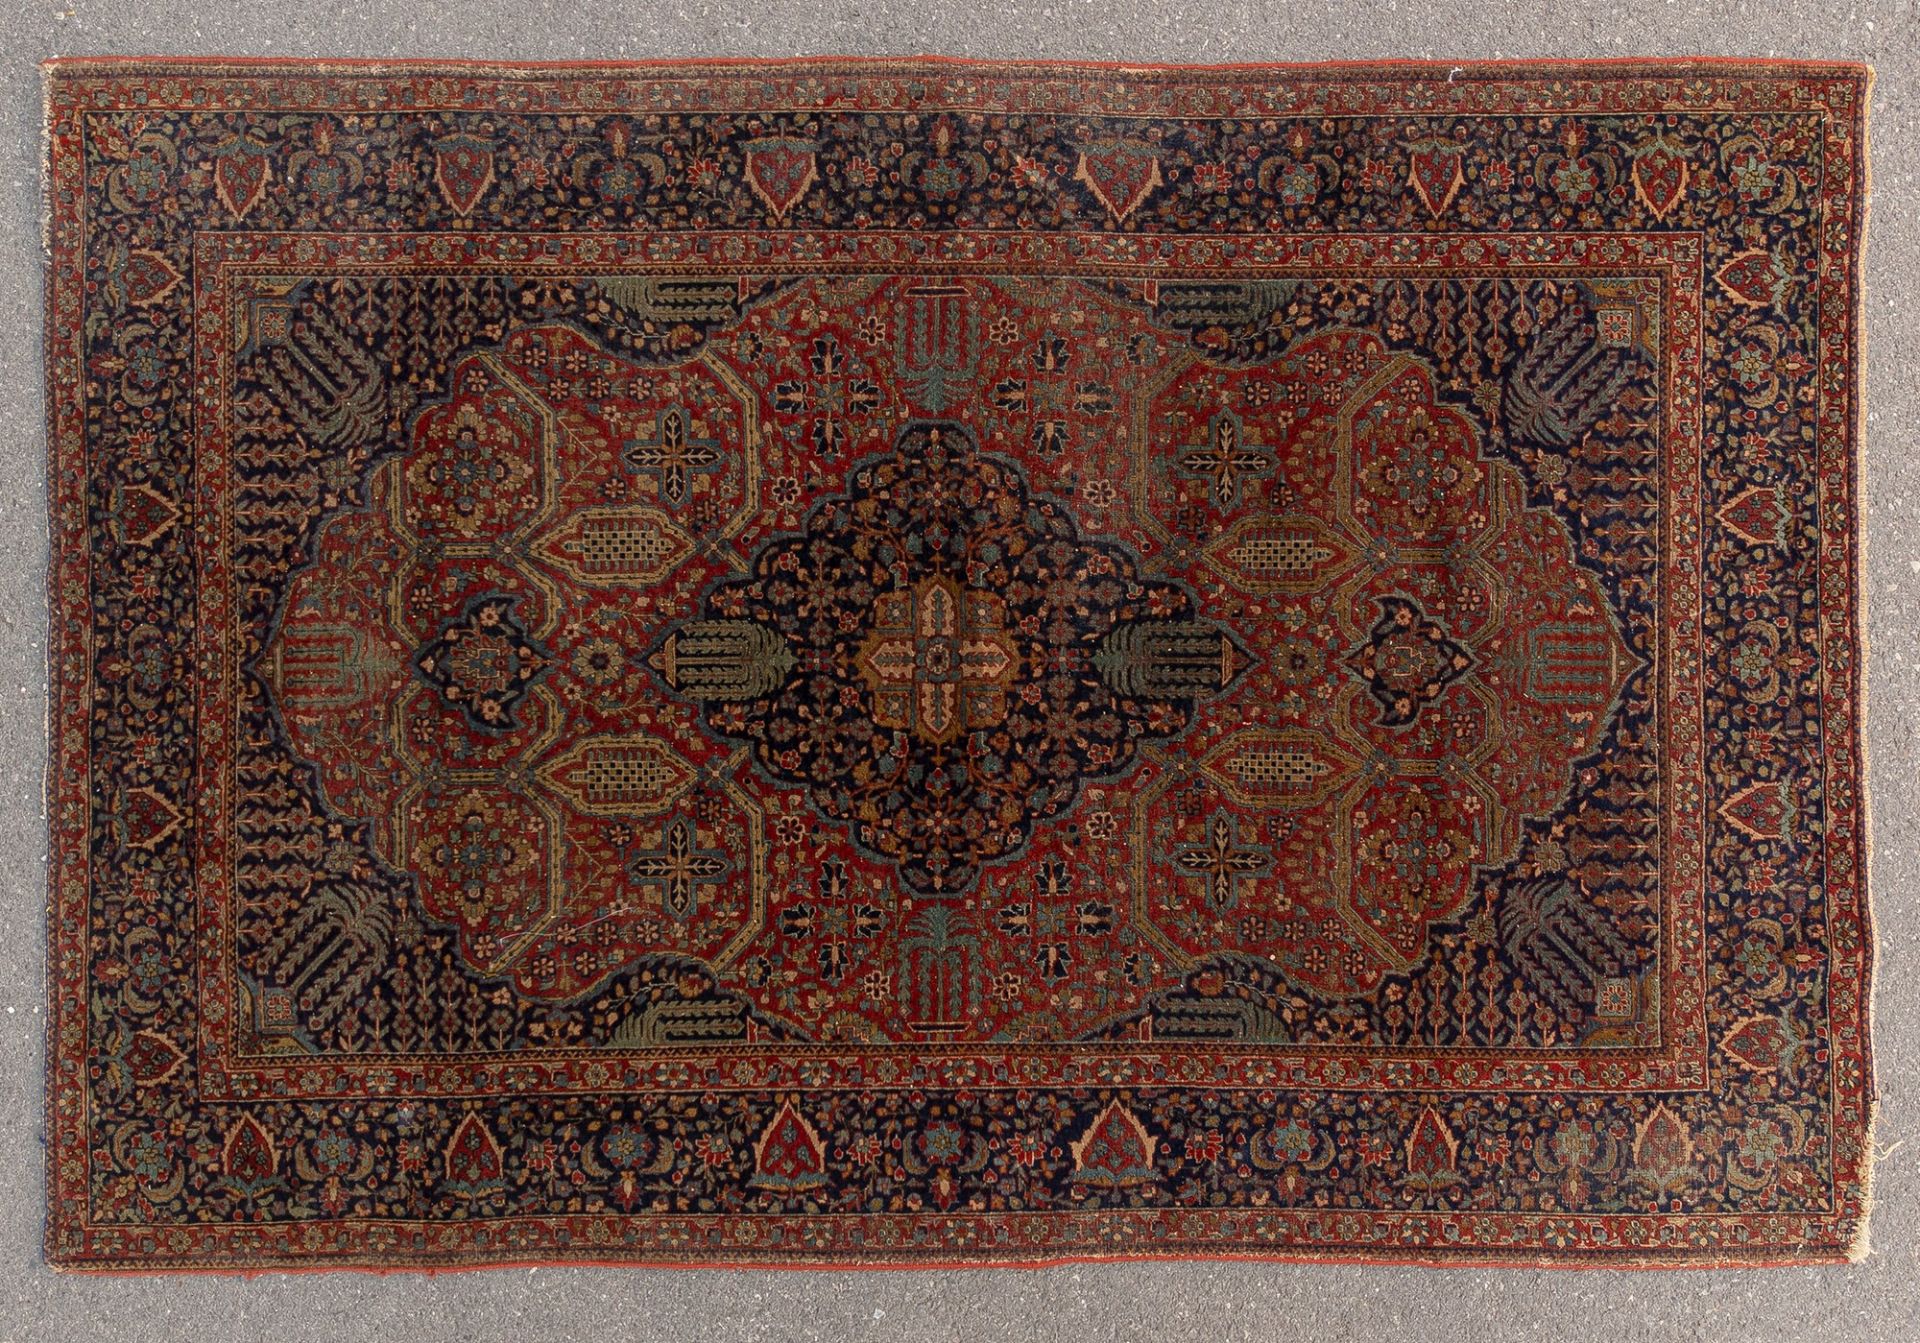 Very fine Persian Kashan carpet from the early 20th century